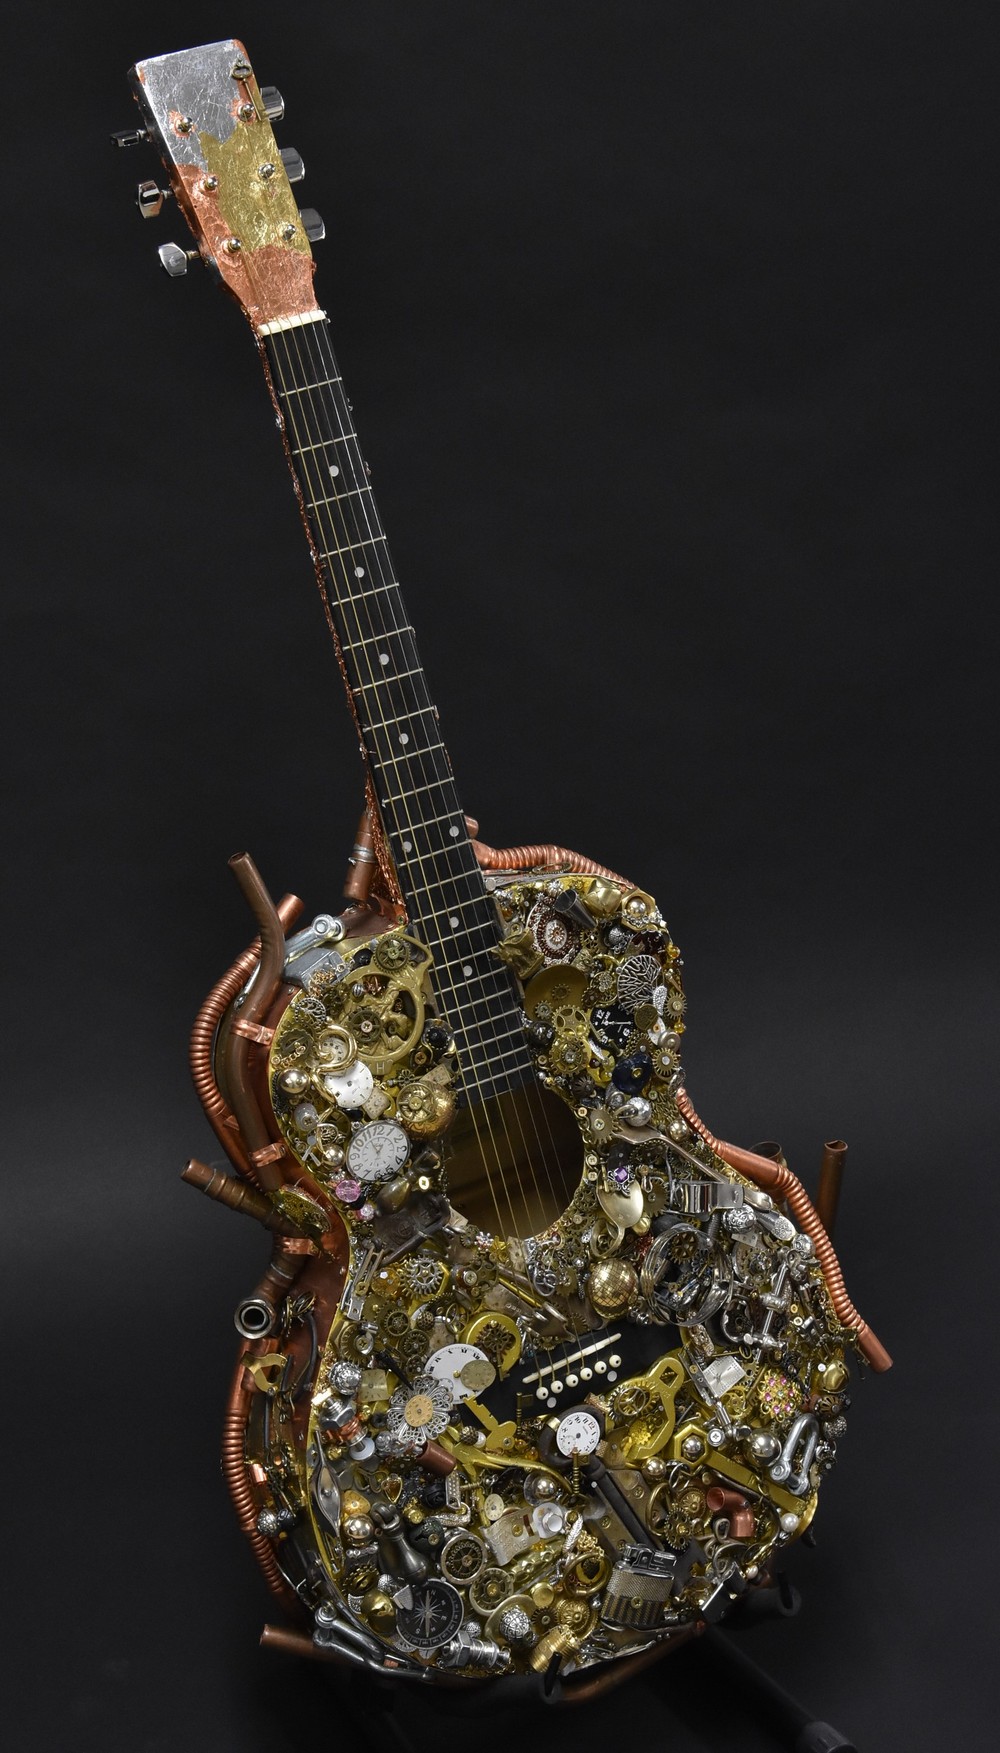 Steampunk Artwork - a bespoke full size acoustic guitar, typically applied with cogs, wheels,